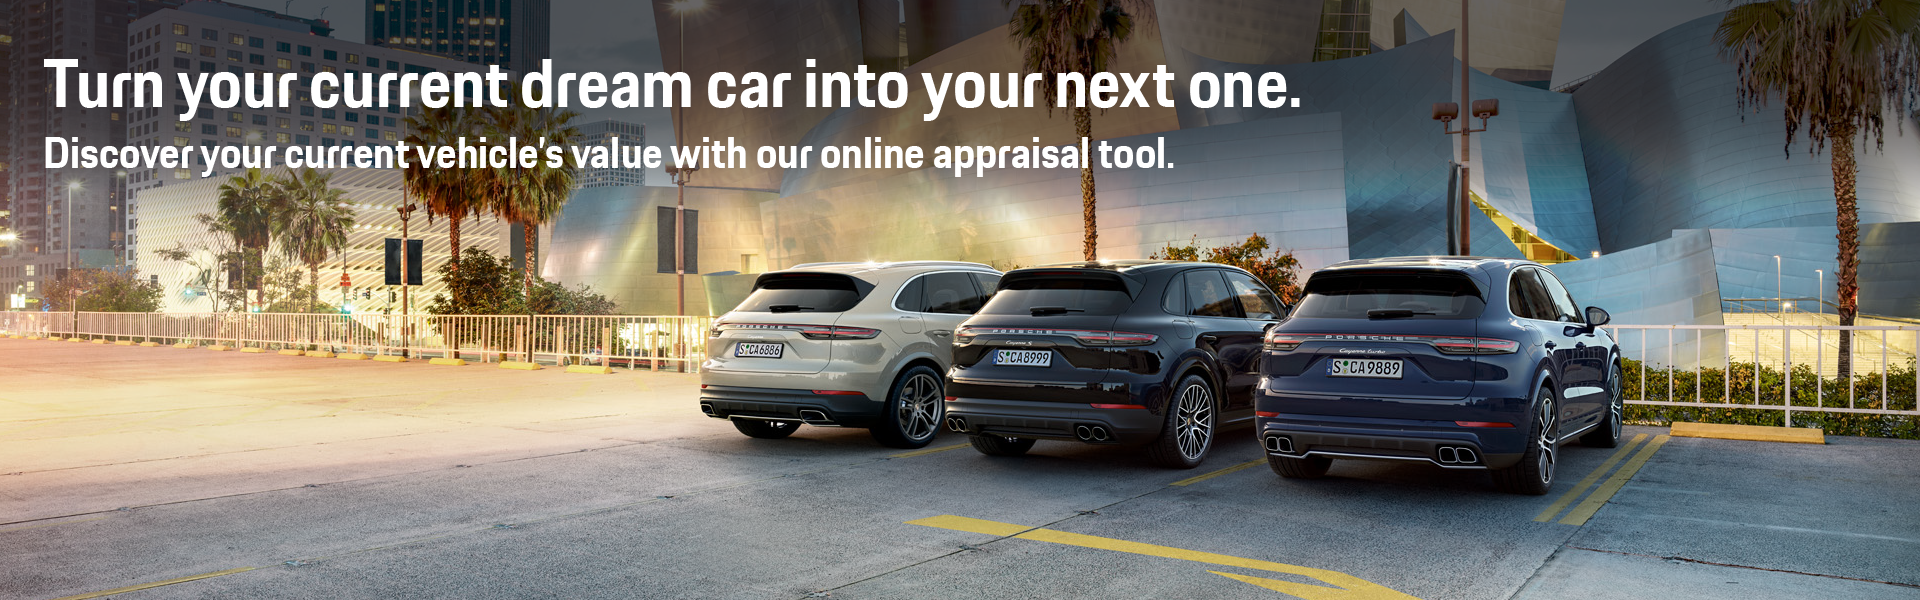 Discover your vehicle's value with our trade appraisal tool